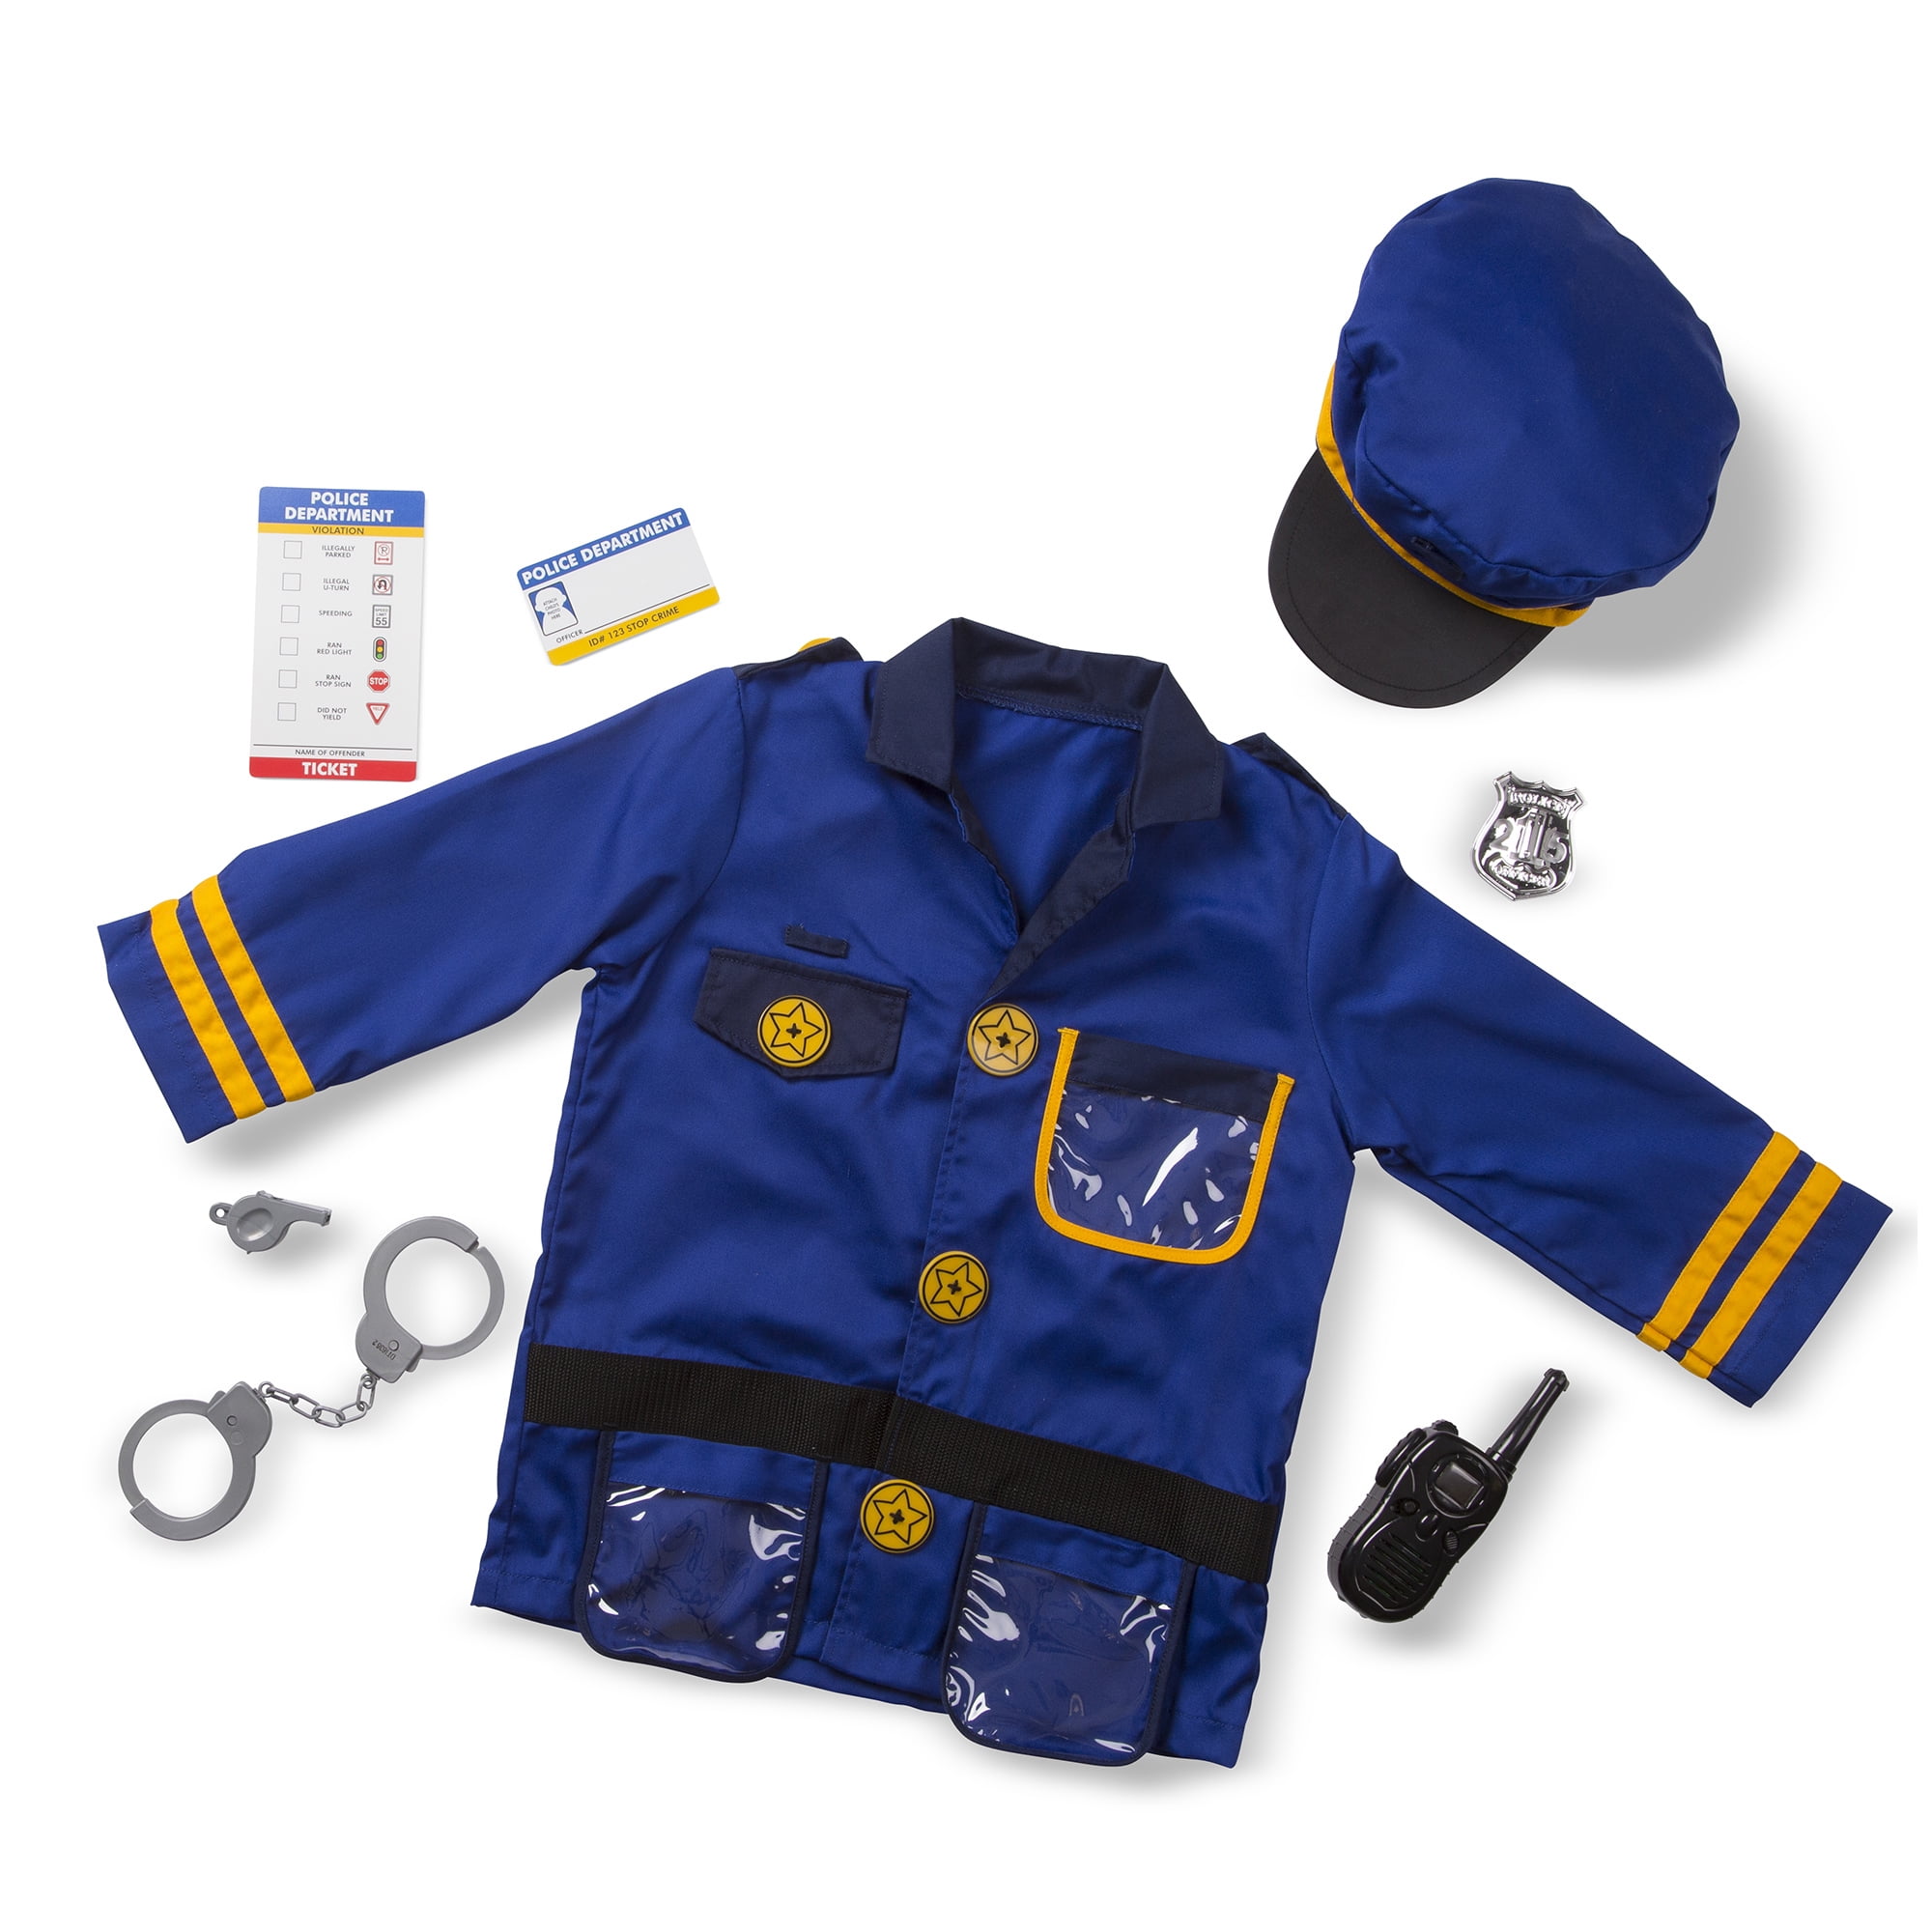 Children's Melissa & Doug Police Officer Role Play Costume Set, Kids Unisex, Size: One Size (Fits Ages 3-6), Police Officer